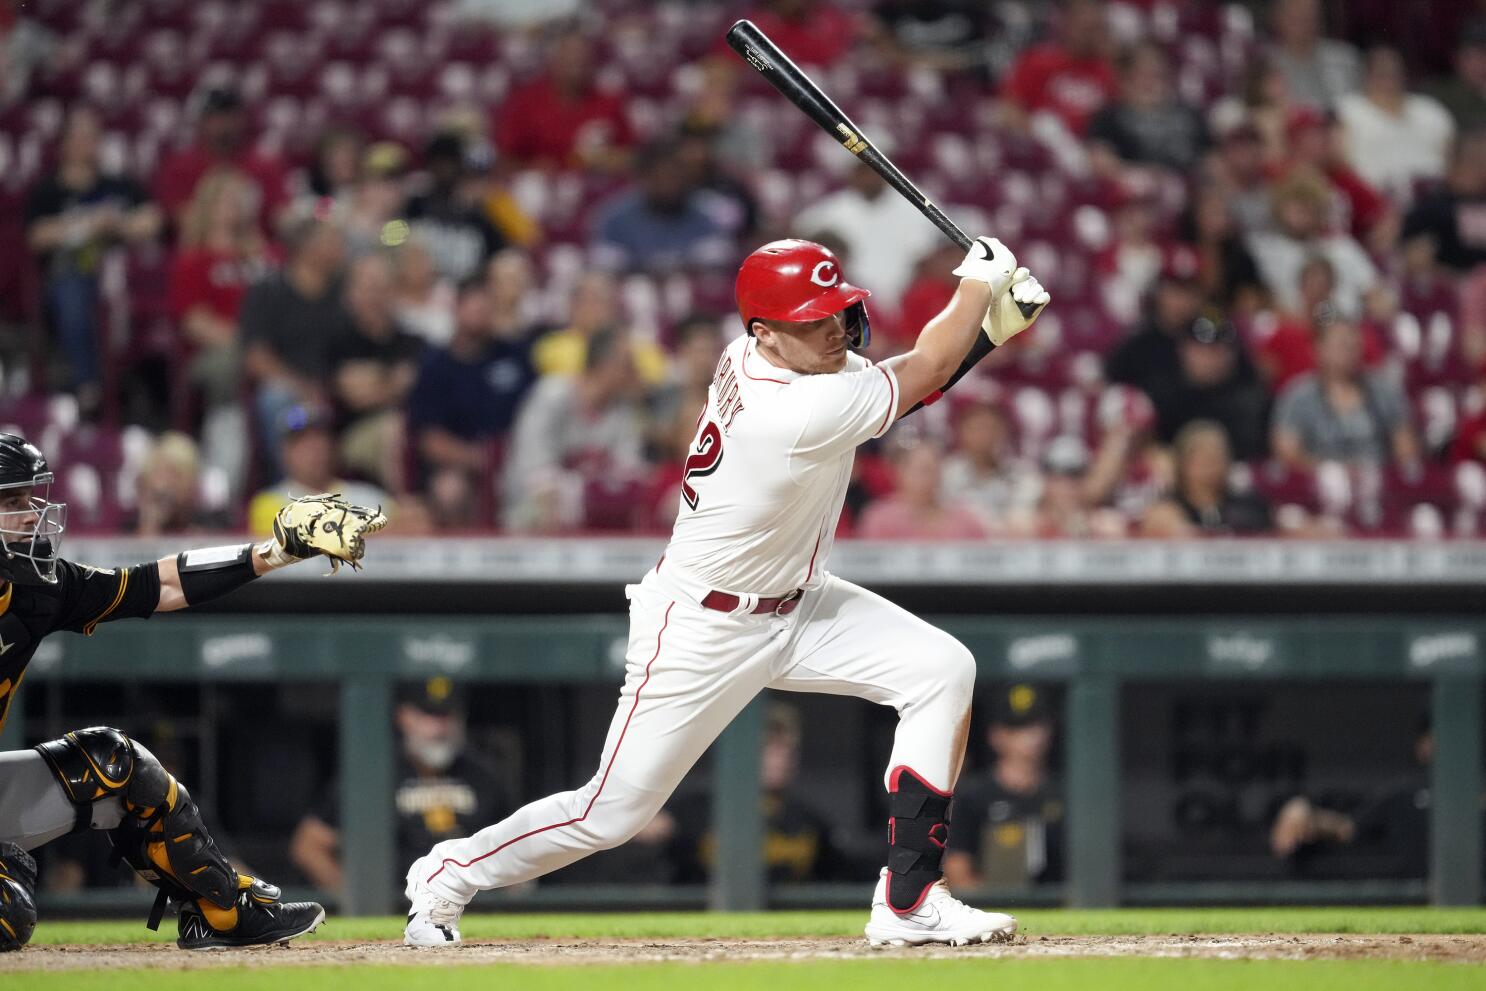 Reds: Brandon Drury has solidified his roster spot